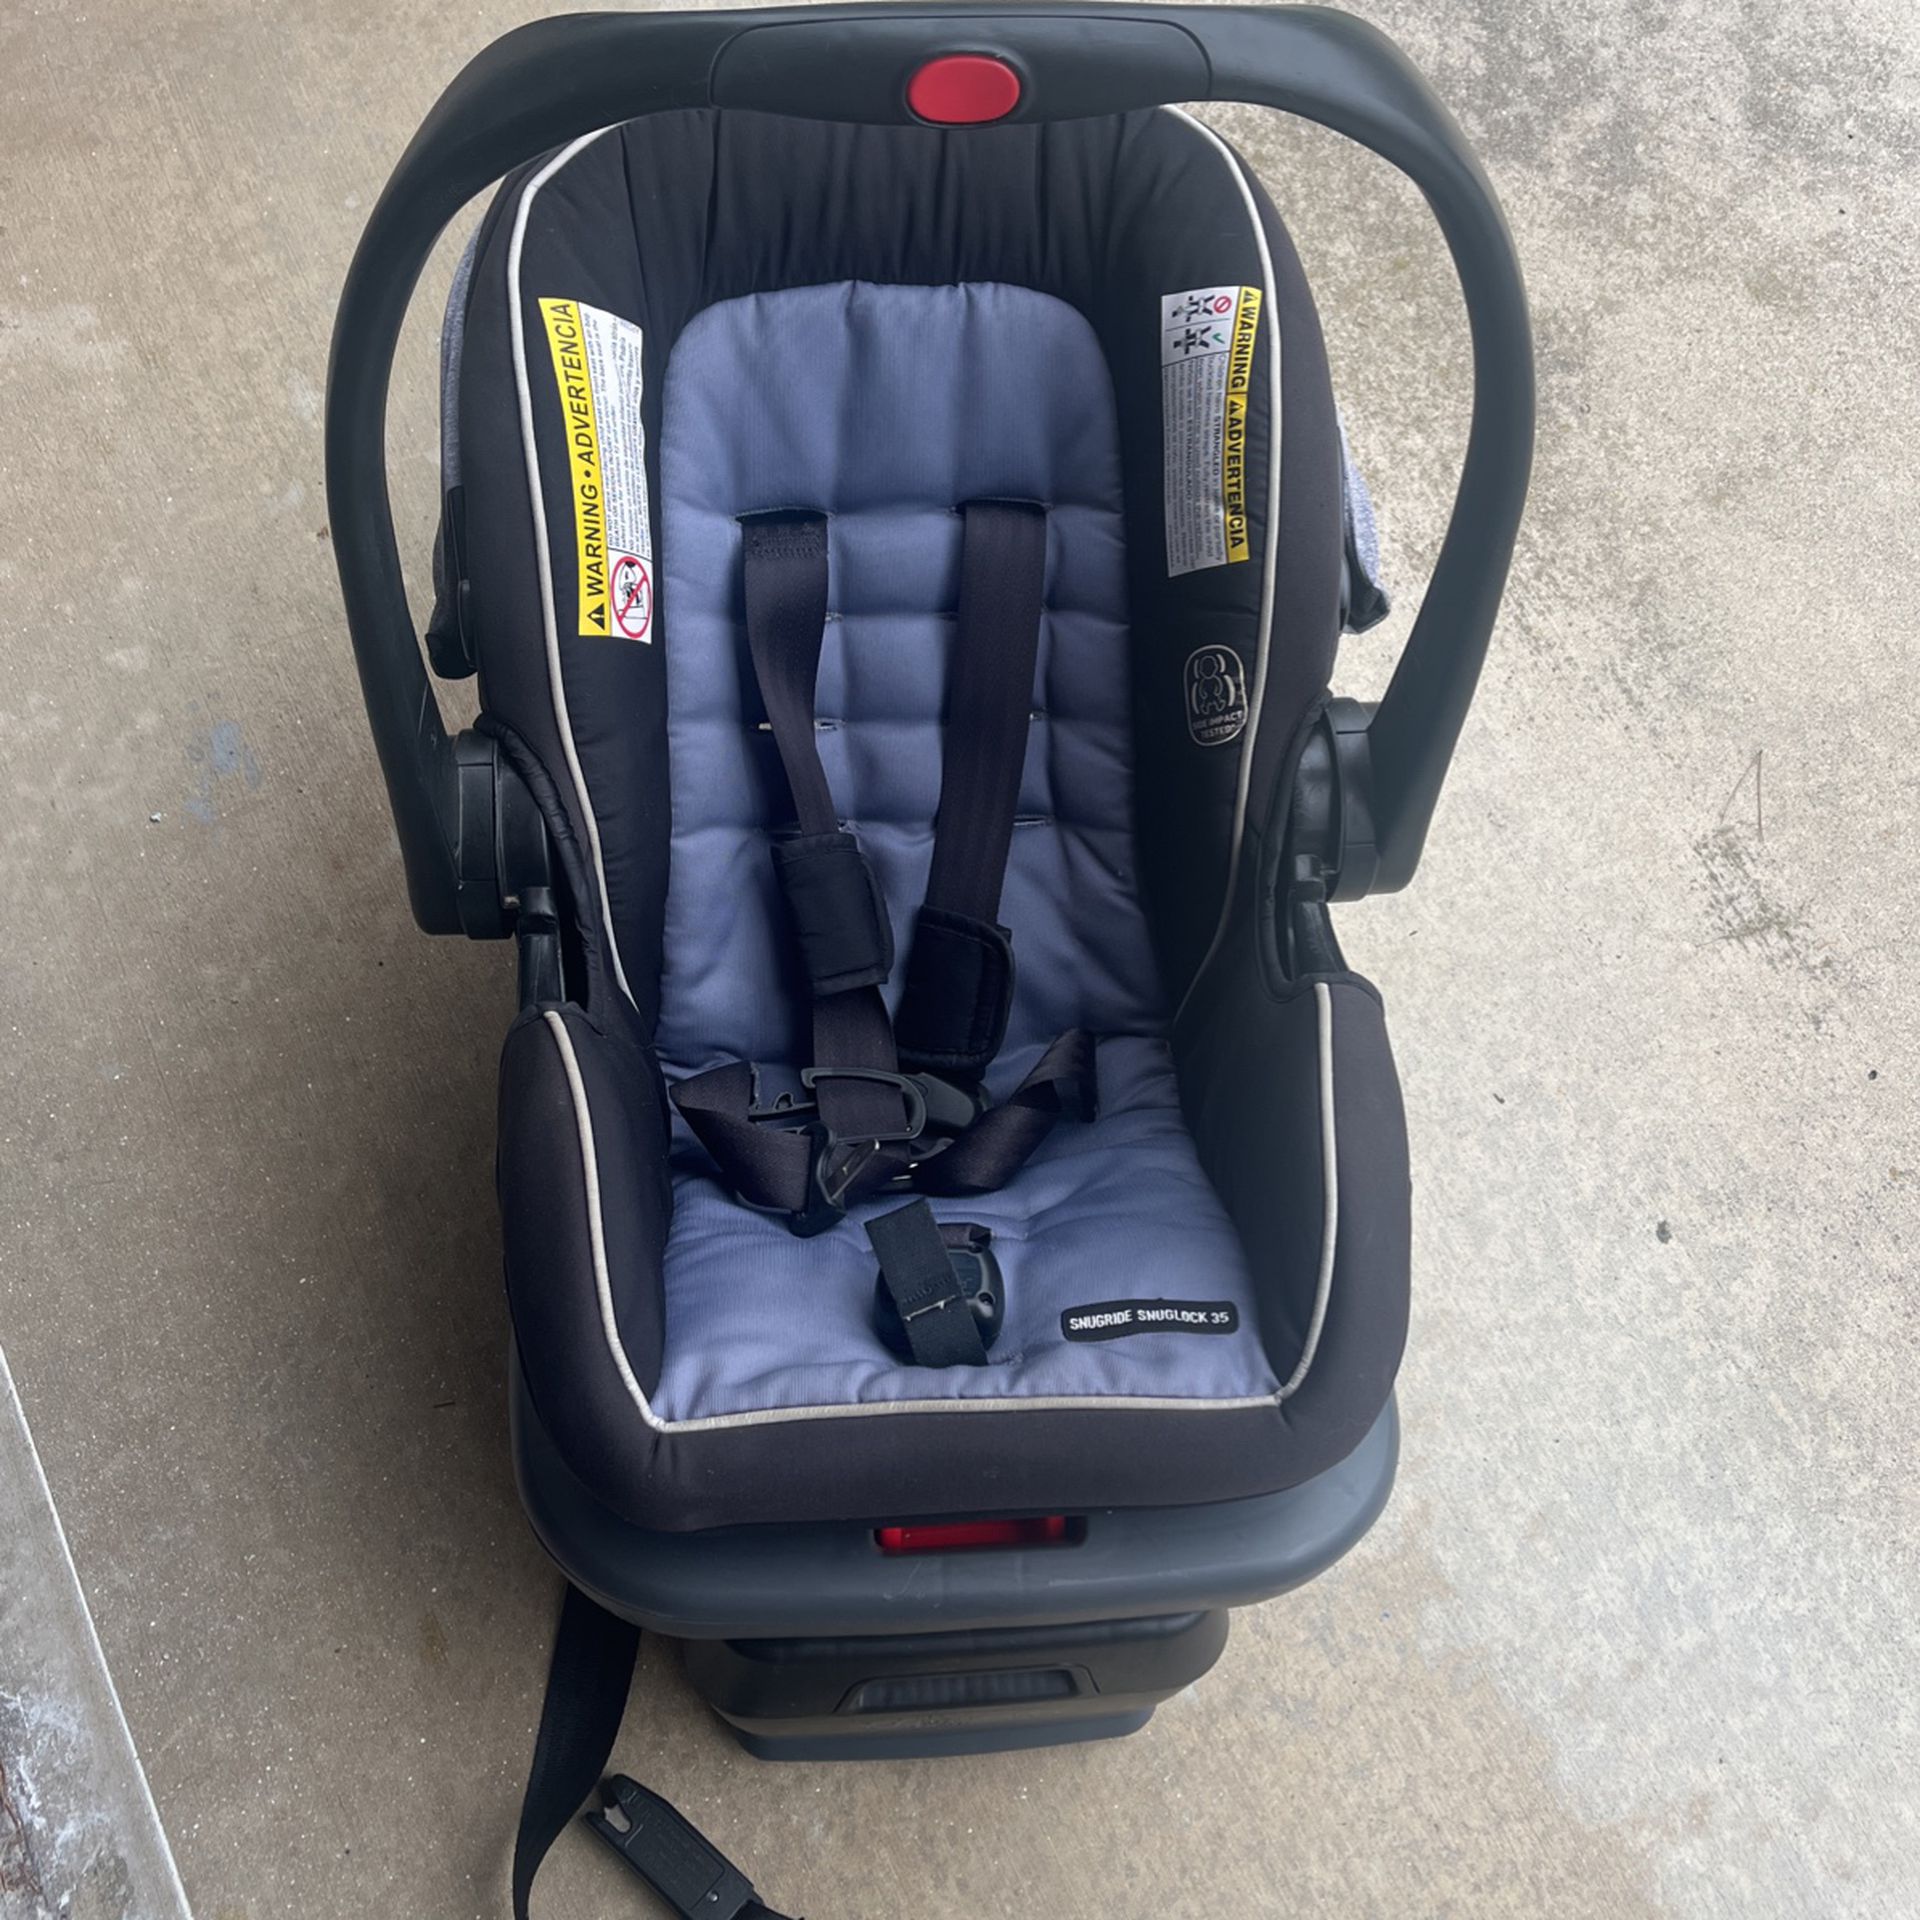 Infant Car Seat Snugride Snuglock 35 With The Base 